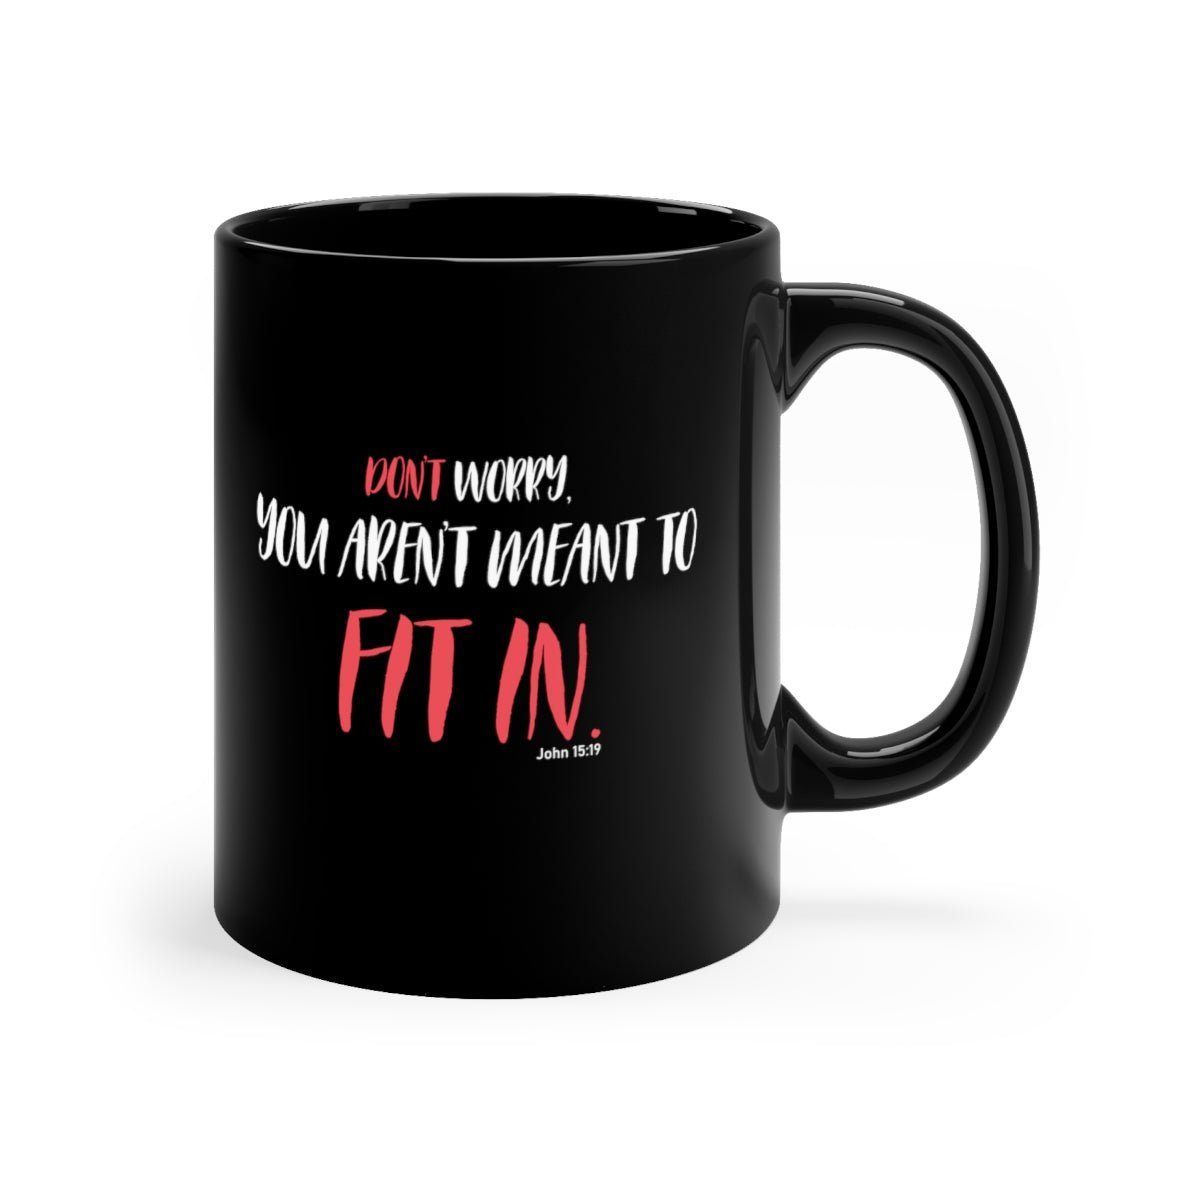 You Aren't Meant To - Mug - Trini-T Ministries